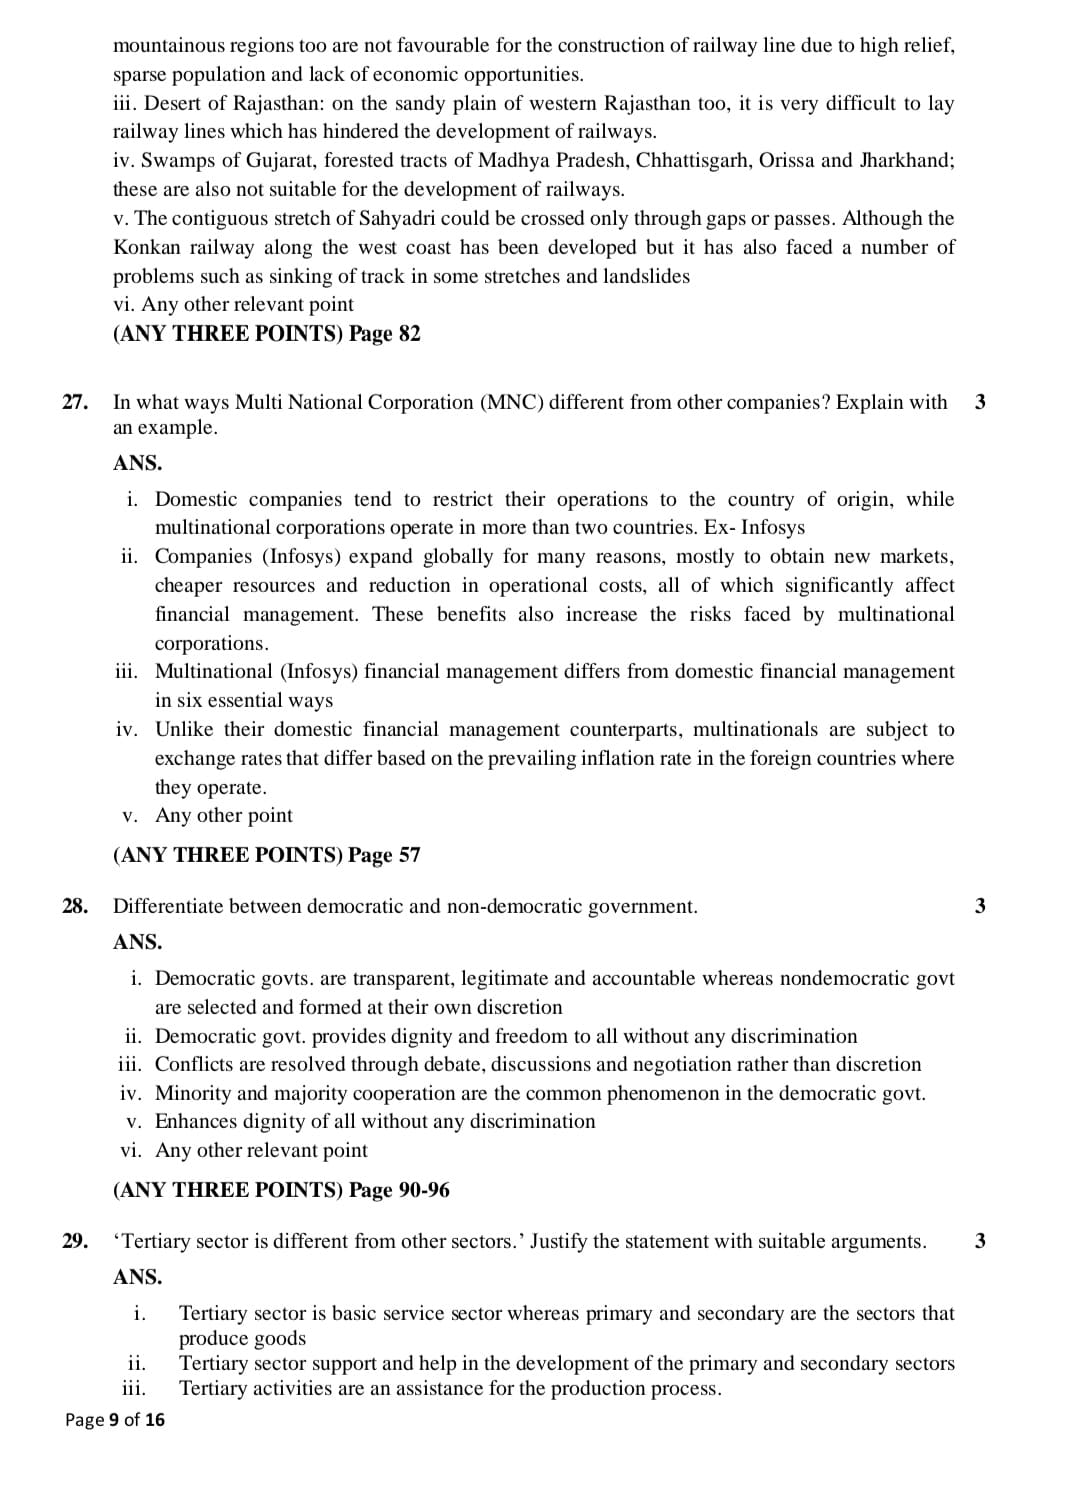 cbse class 10 social science official sample question paper9